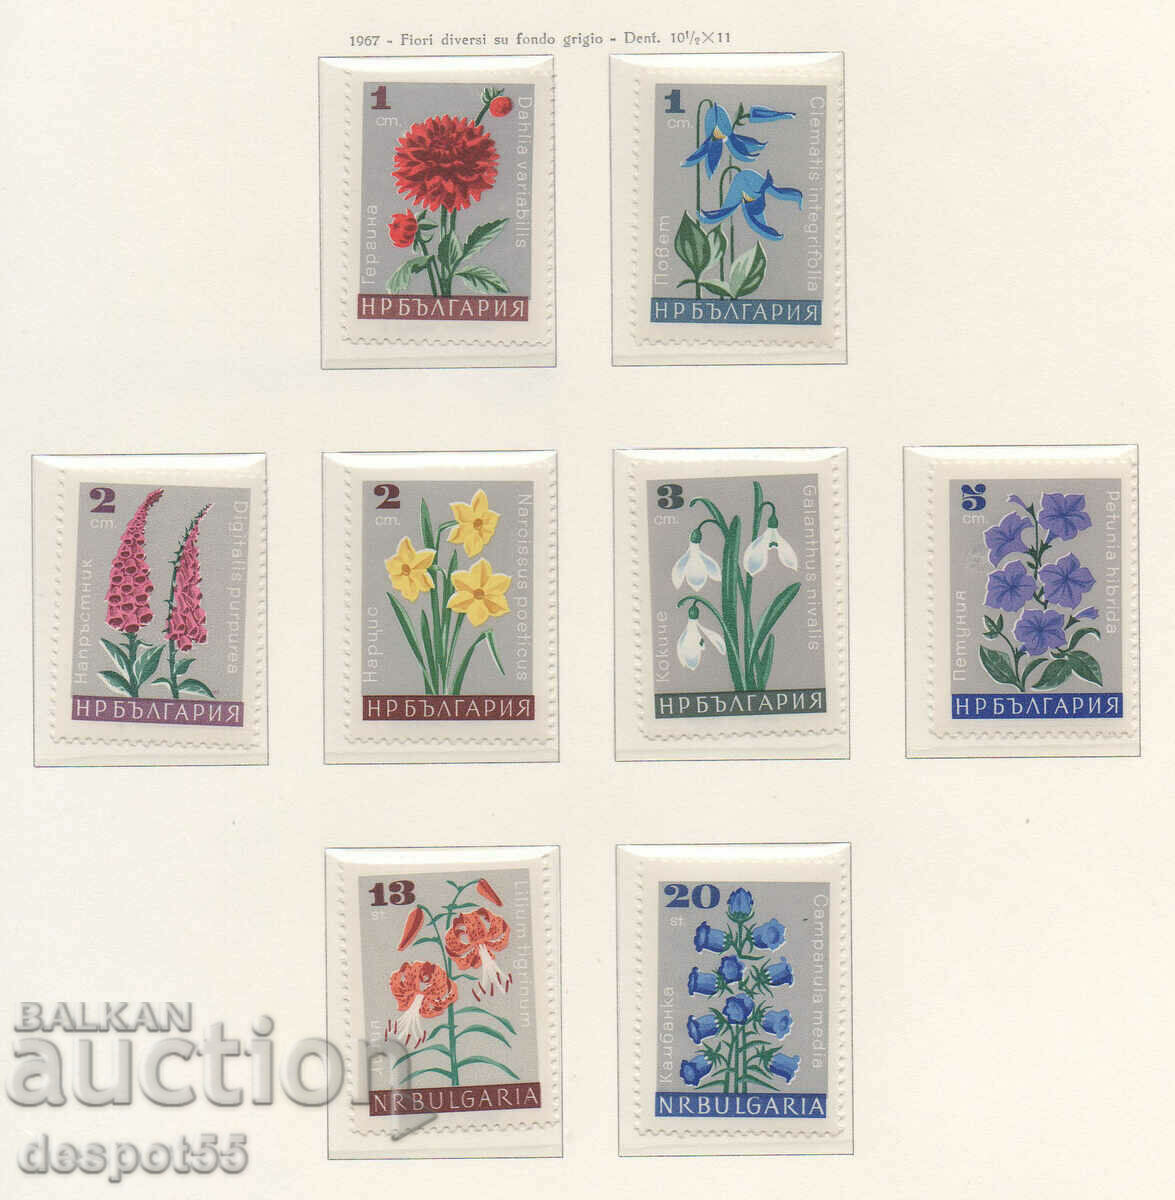 1966. Bulgaria. Garden flowers on a gray background.